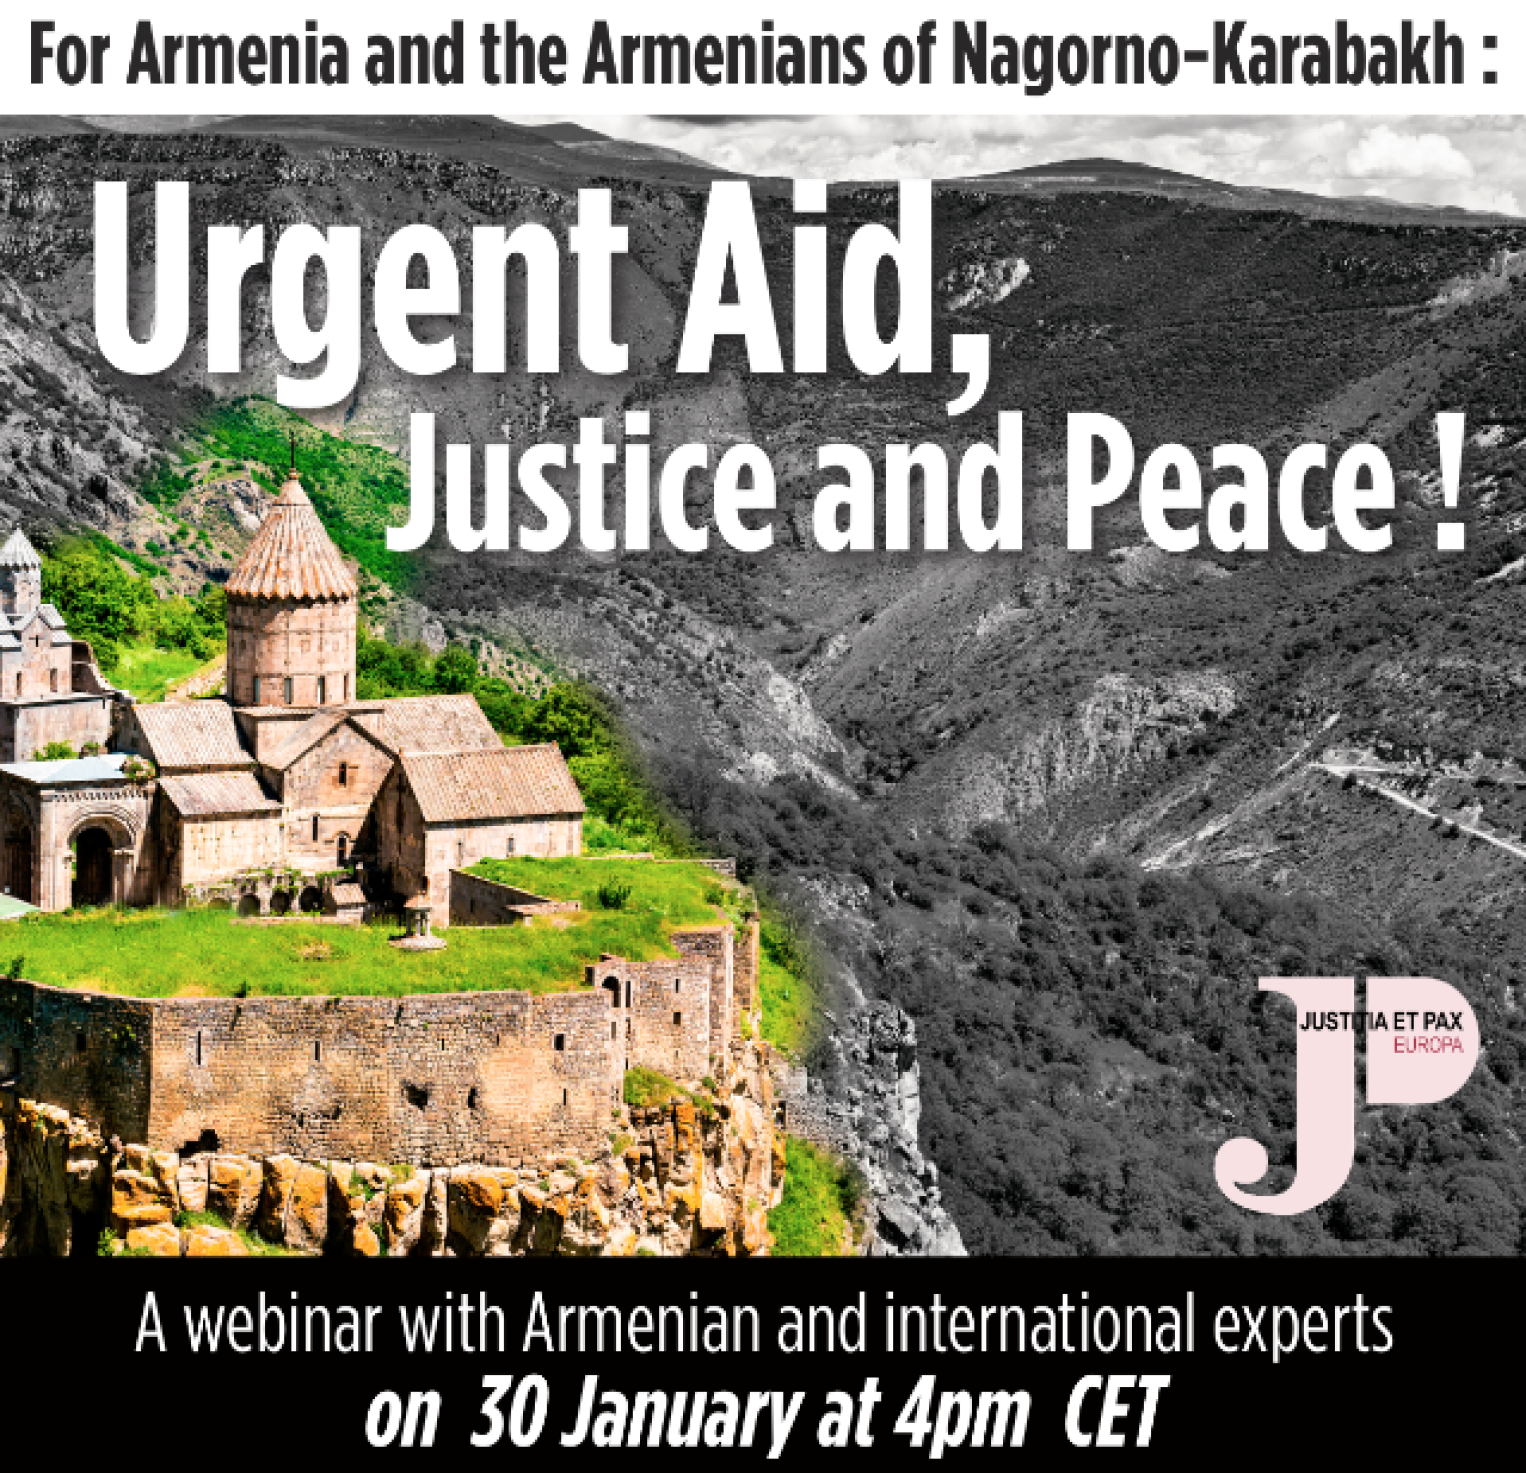 Webinar "Urgent Aid, Justice and Peace for Armenia and the Armenians of Nagorno-Karabakh"